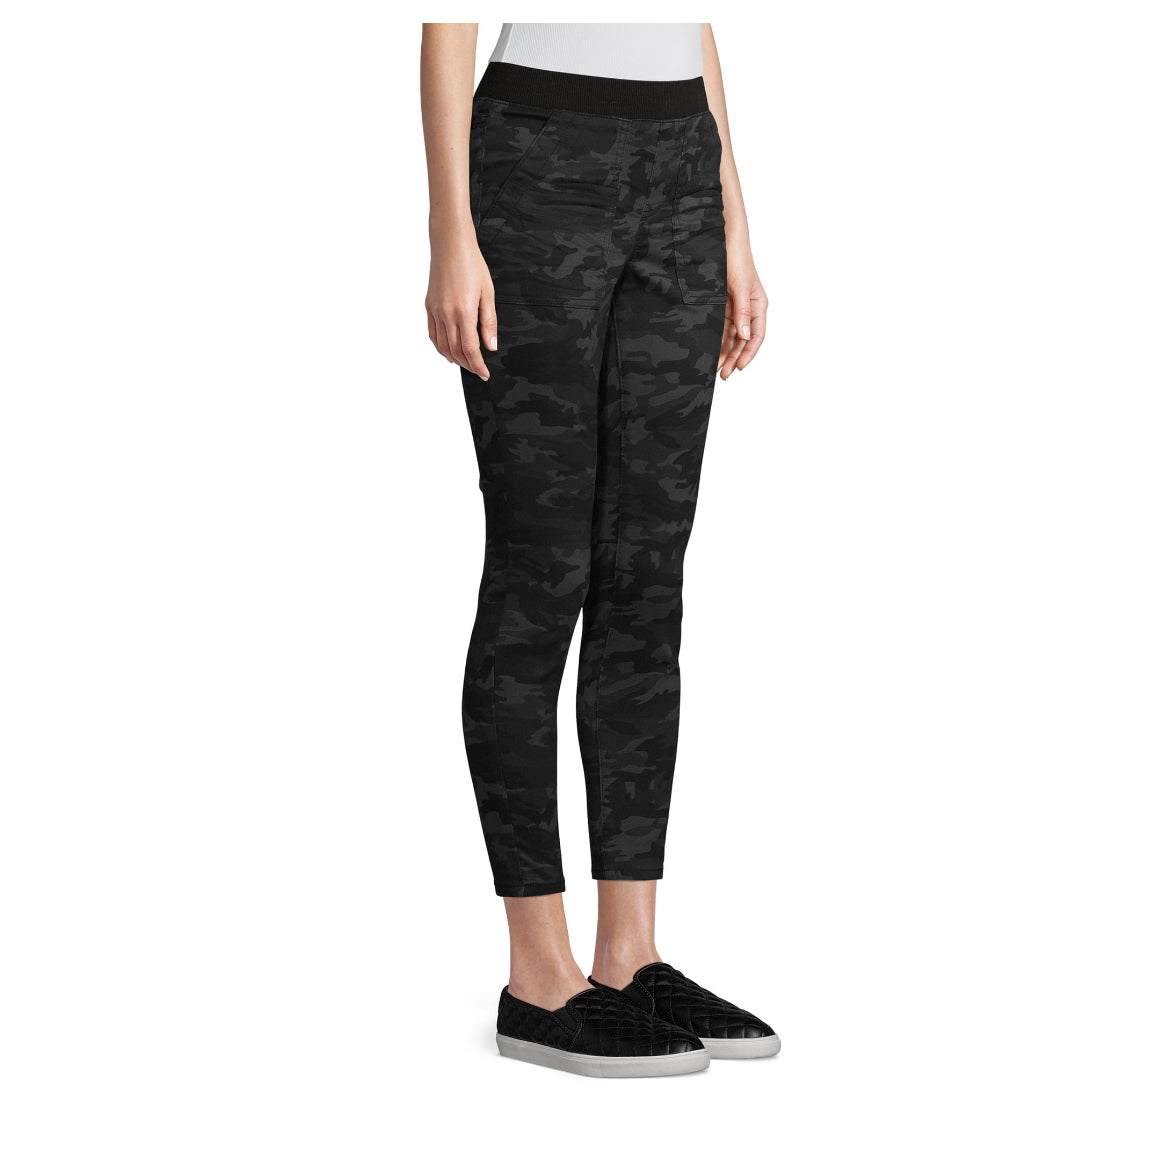 No Boundaries Juniors' Mid Rise Pull-On Jeggings with Rib Waistband